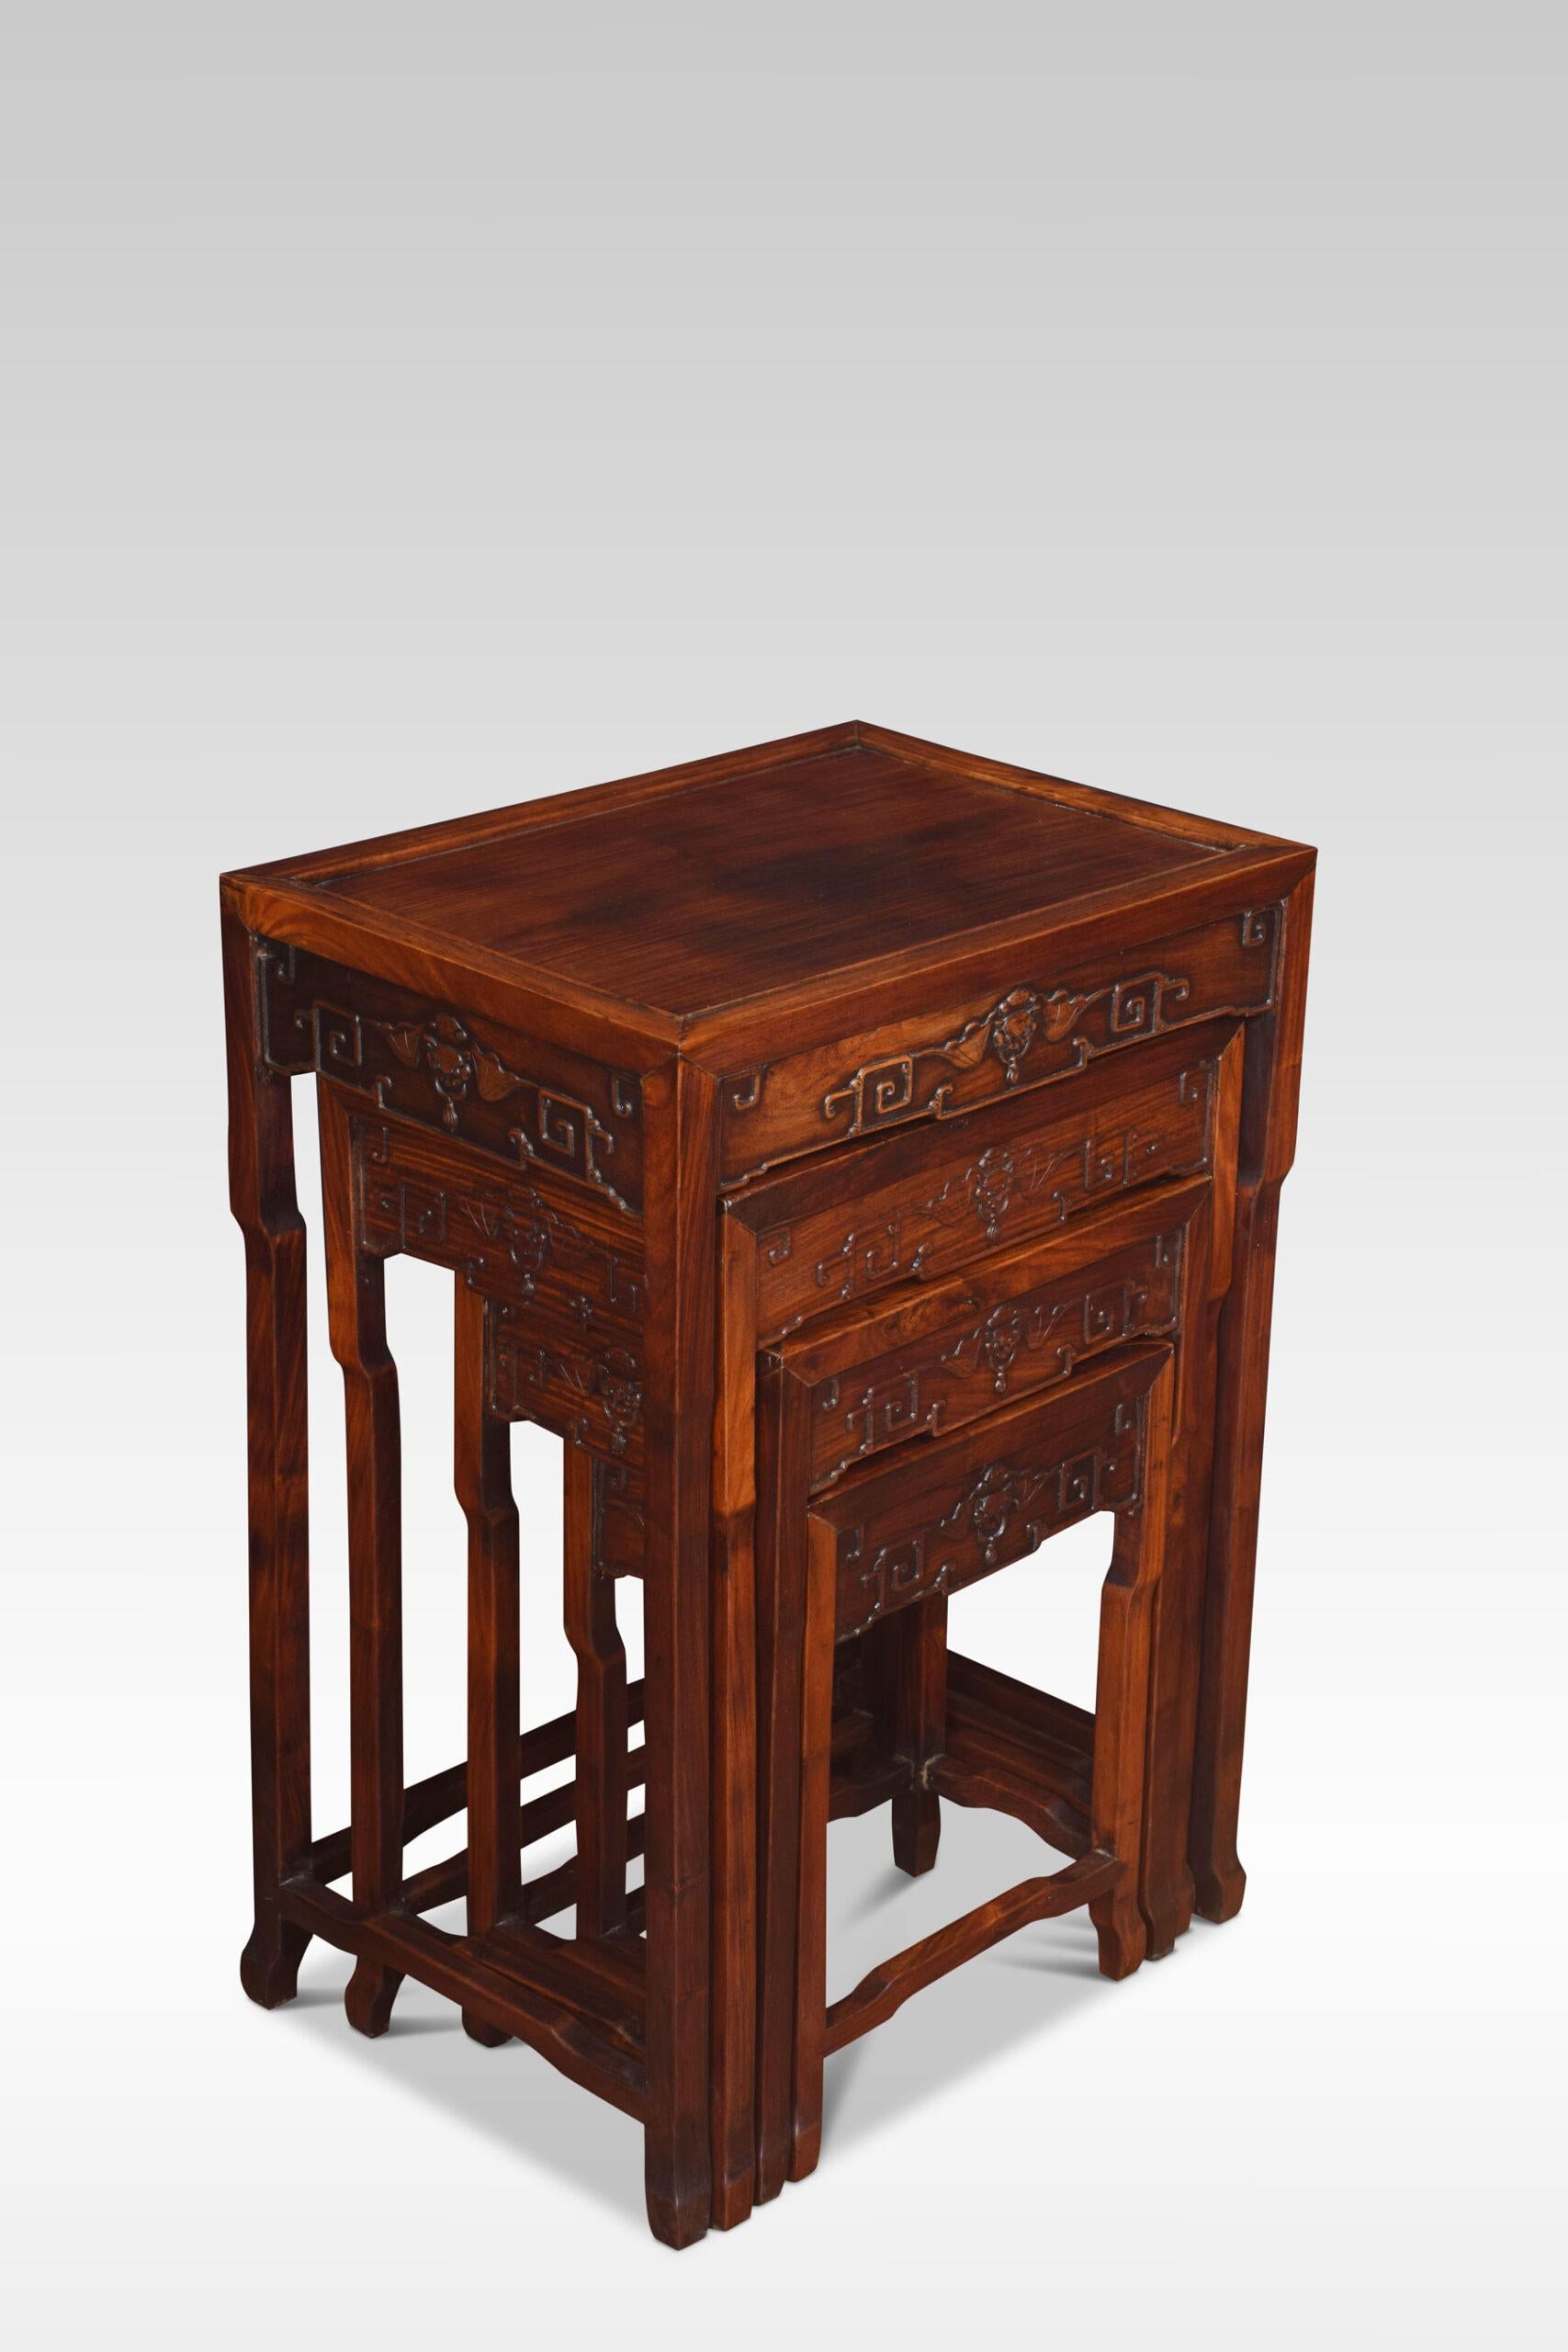 Nest of four rosewood tables each with a recessed panel to the rectangular top and a carved frieze on four slender supports with conforming stretchers
Dimensions
Height 29 Inches
Width 20.5 Inches
Depth 15 Inches